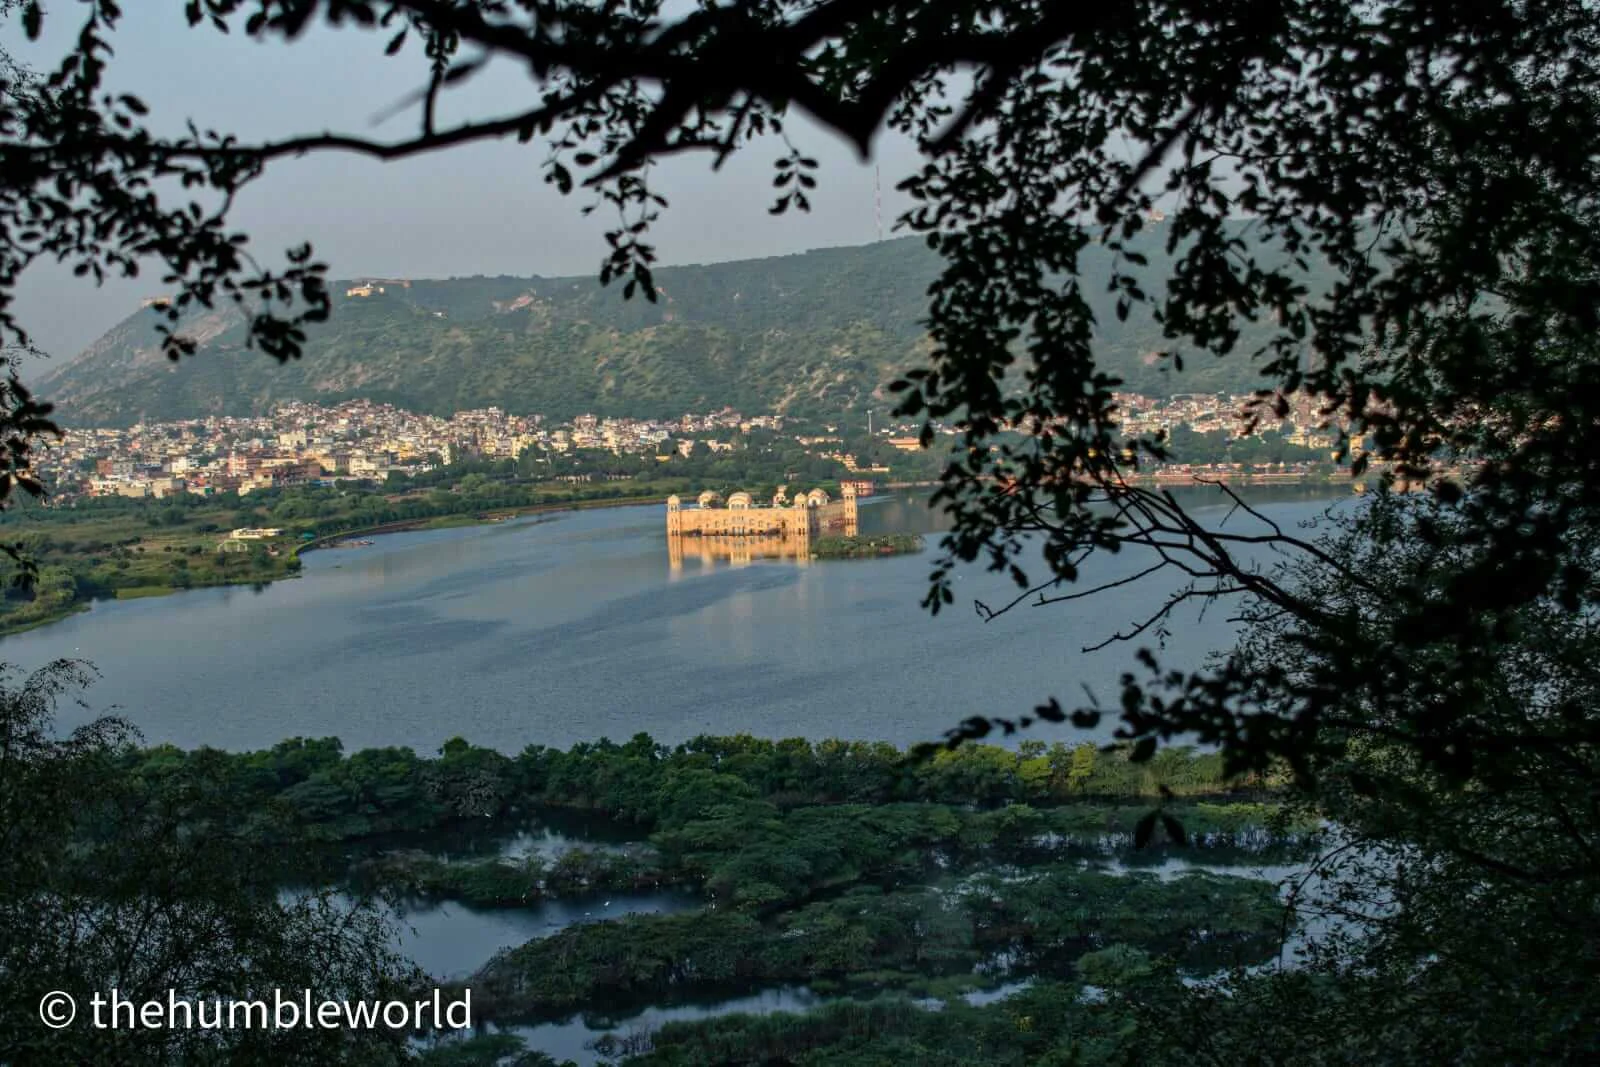 Captured this incredible view of Jal Mahal while trekking